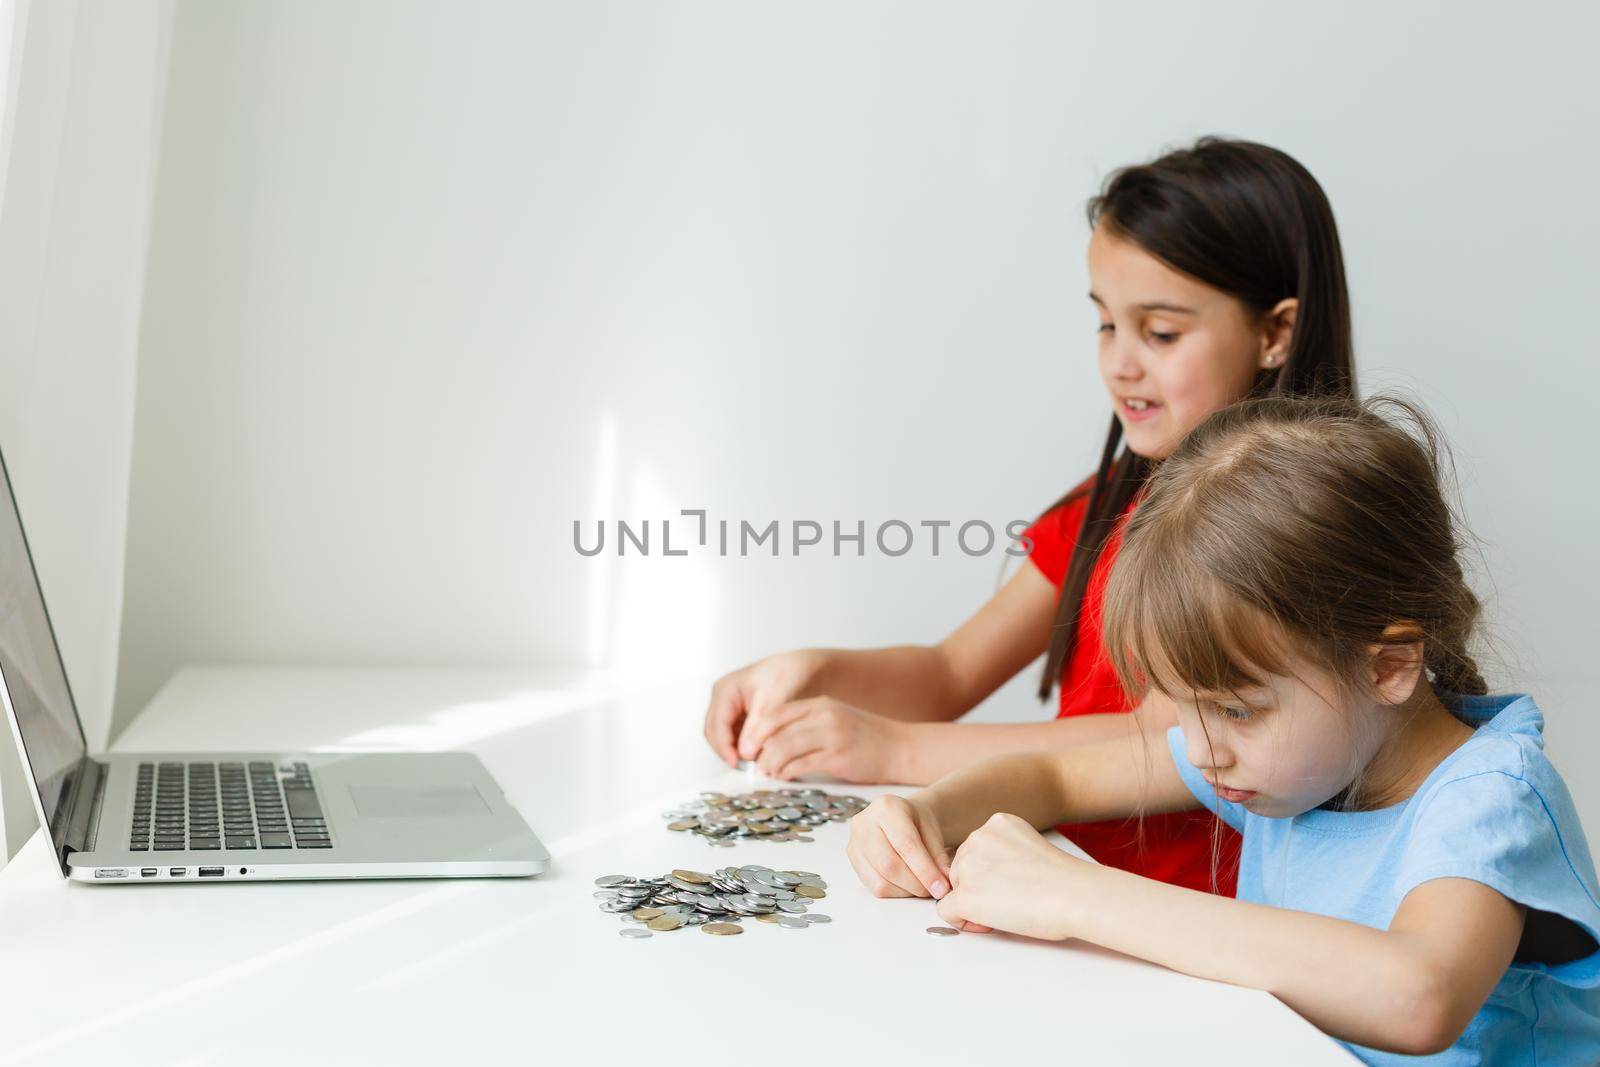 Two kids counting coins together by Andelov13